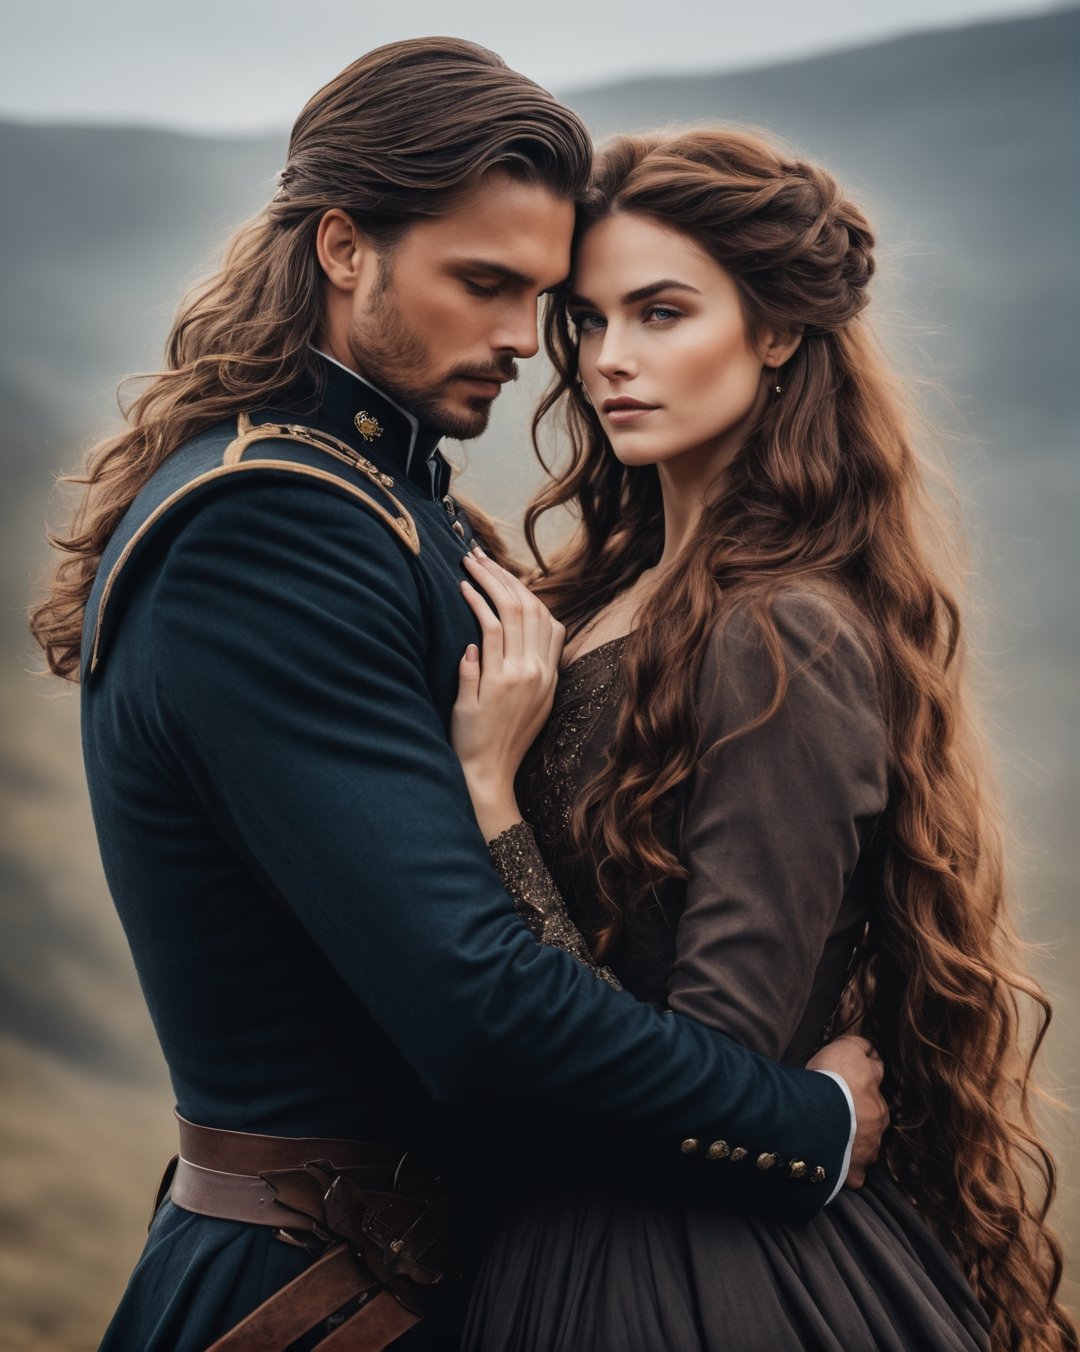 a man and a woman embracing each other, inspired by A. R. Middleton Todd, shutterstock, romanticism, beautiful rogue lady, brown flowing hair, 2019 trending photo, repin, it has a piercing gaze, commander, with black. magic powers, thumbnail, promotional image